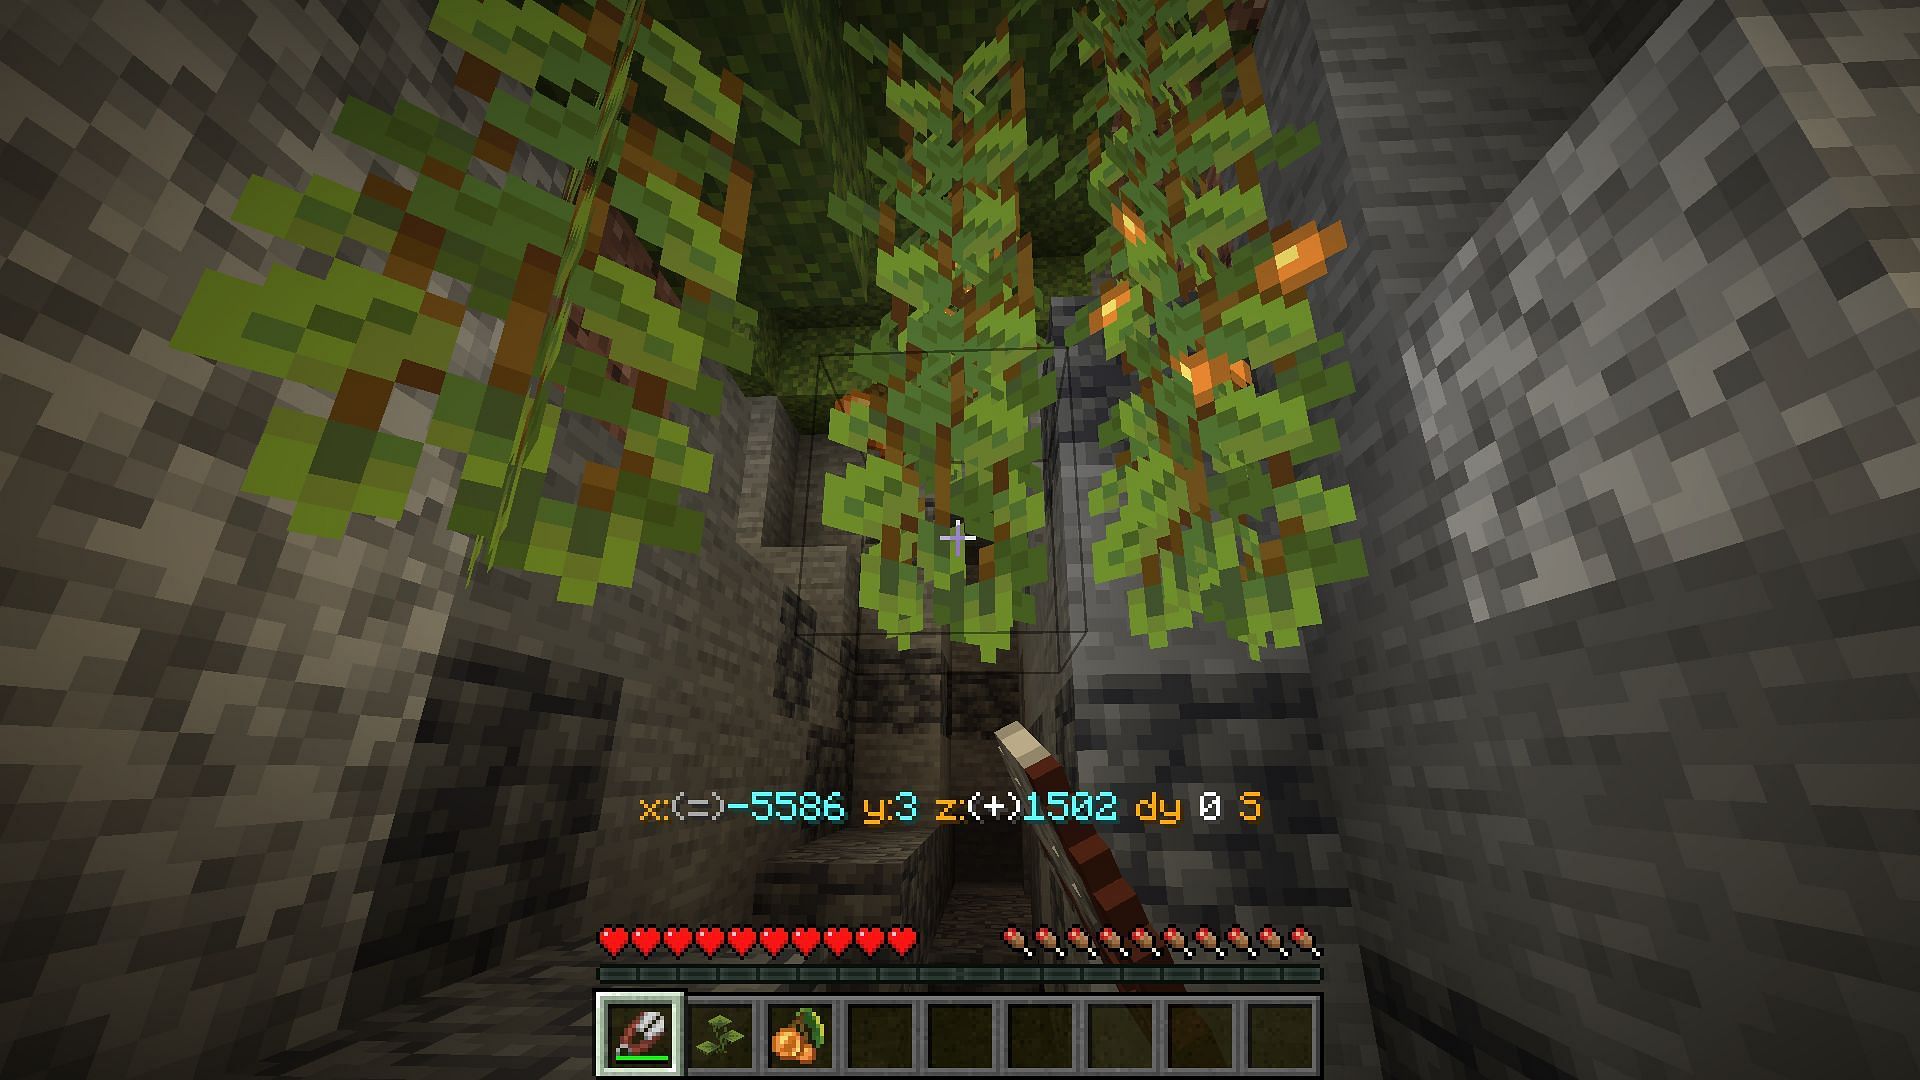 Glowberries are among the best vines to use for decorating a base in Minecraft 1.19 (Image via Mojang)